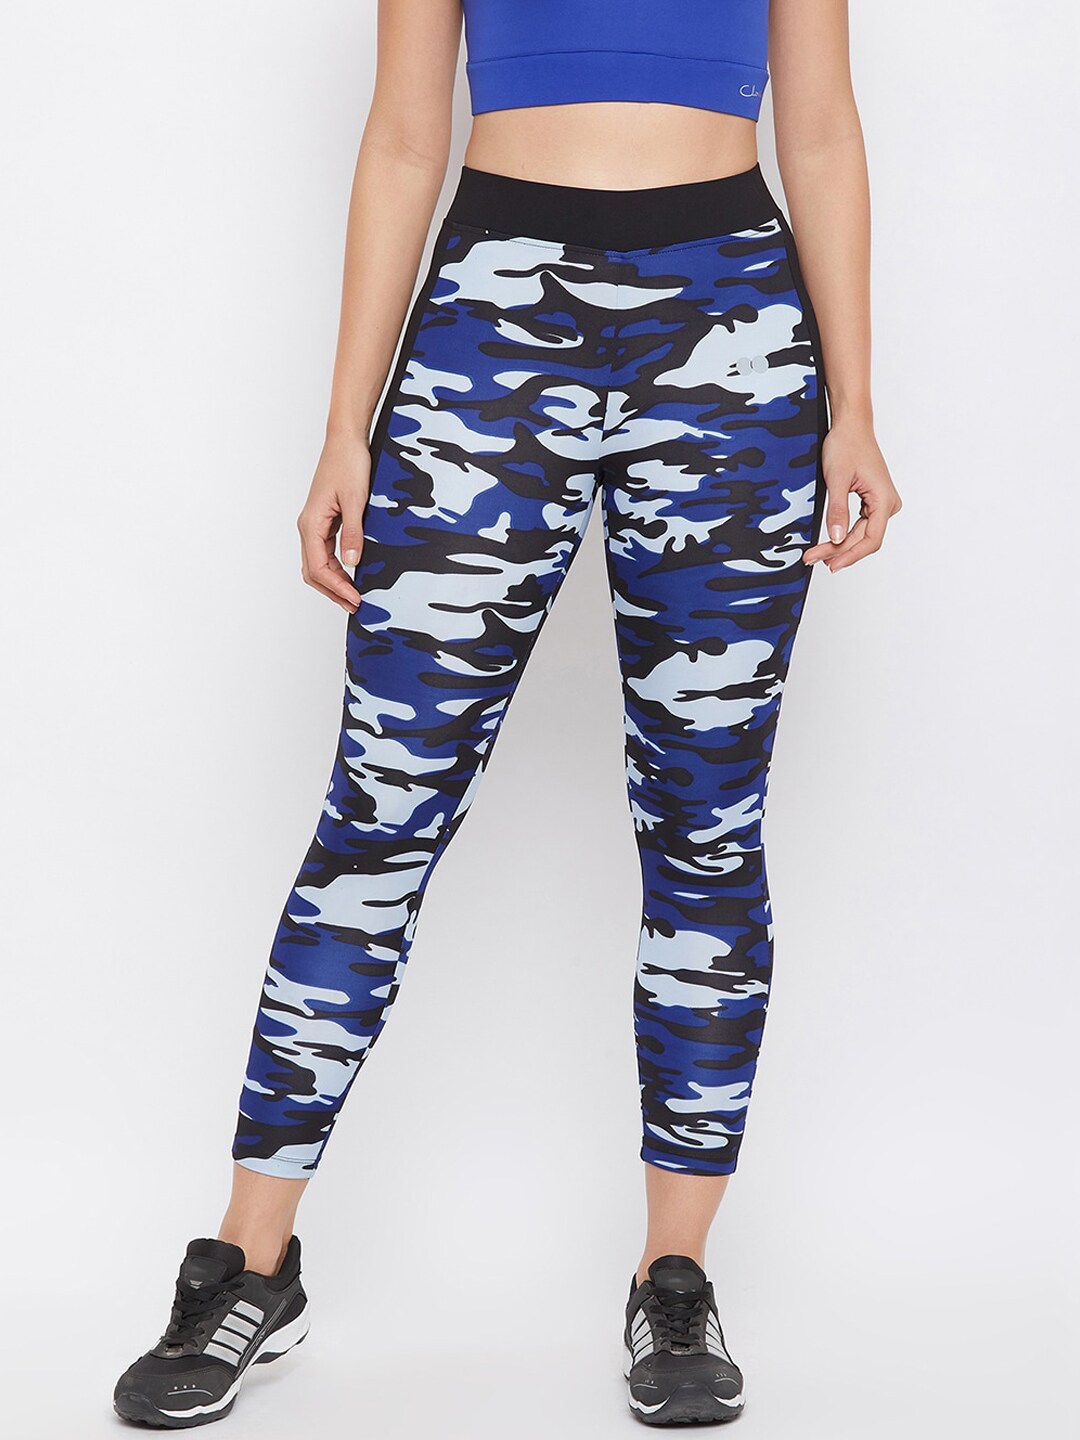 Clovia Women Blue & Black Camouflage Printed Ankle-Length Tights Price in India